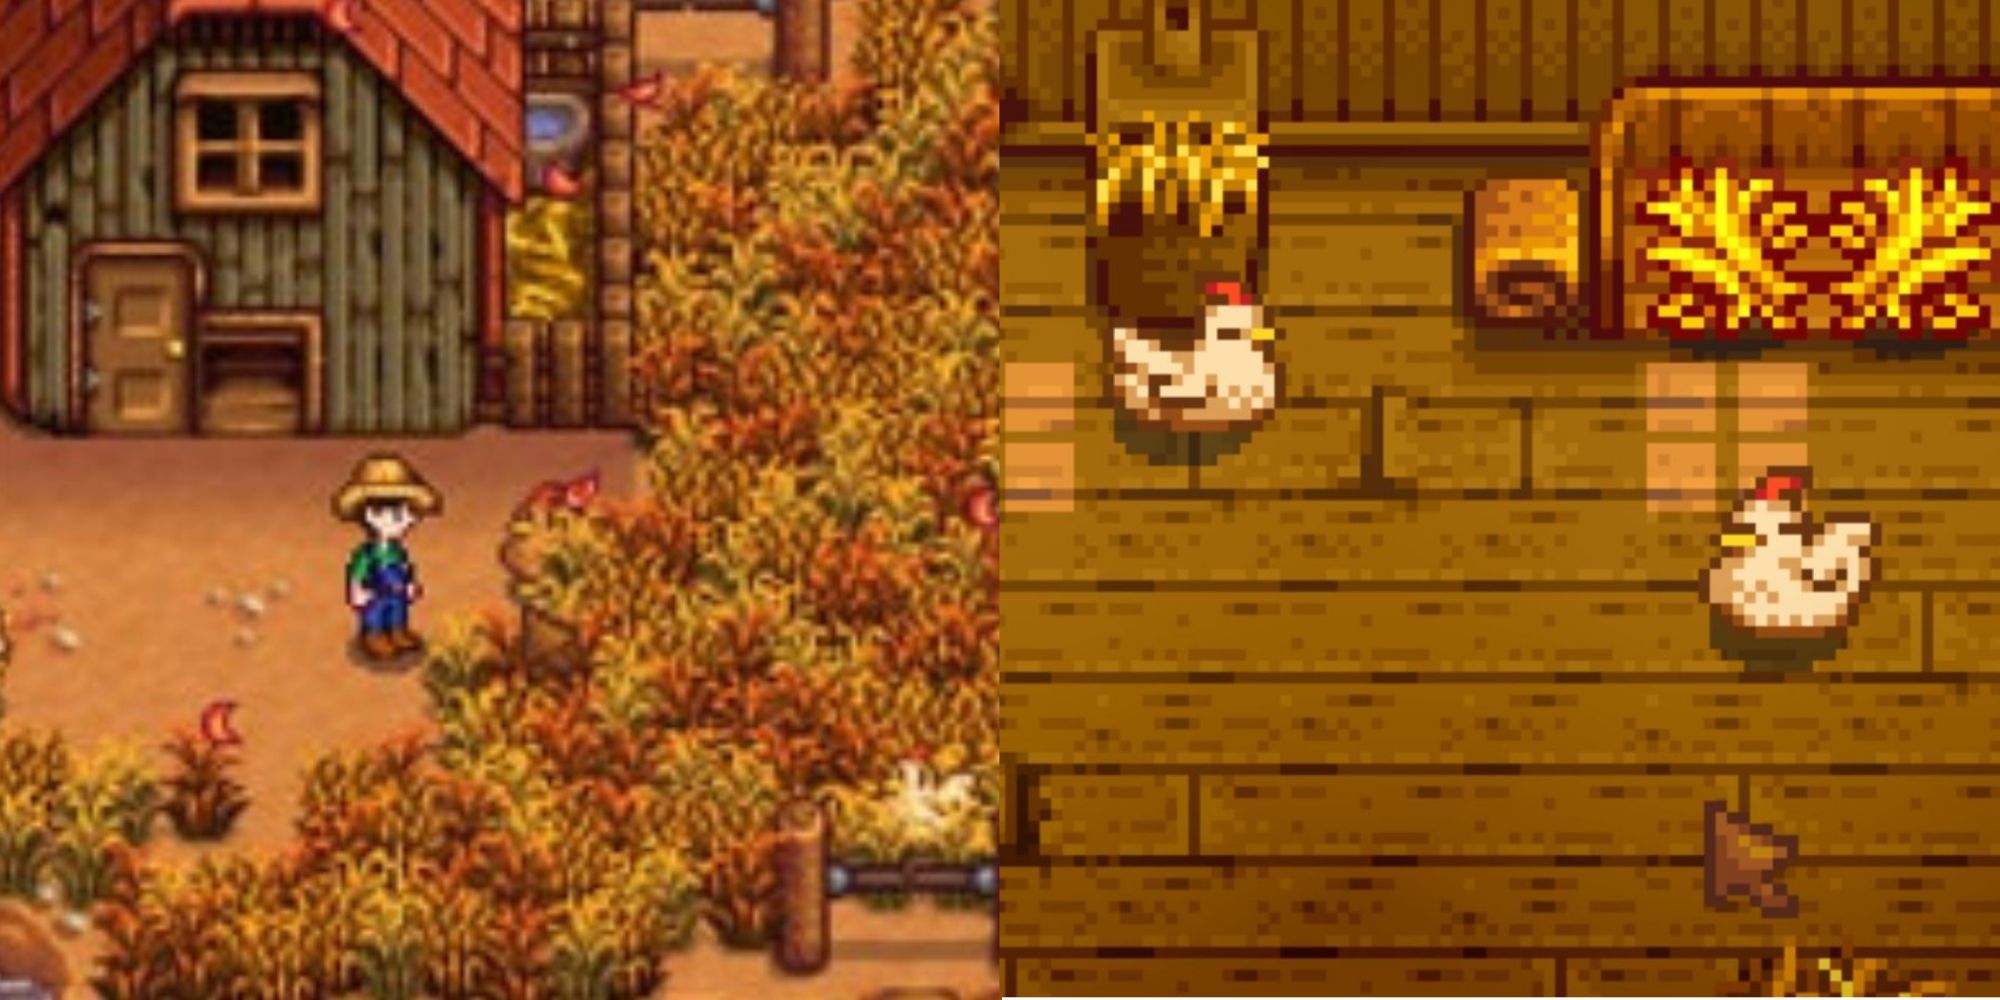 Split images of a player outside of a Coop and two chickens in a Coop in Stardew Valley.